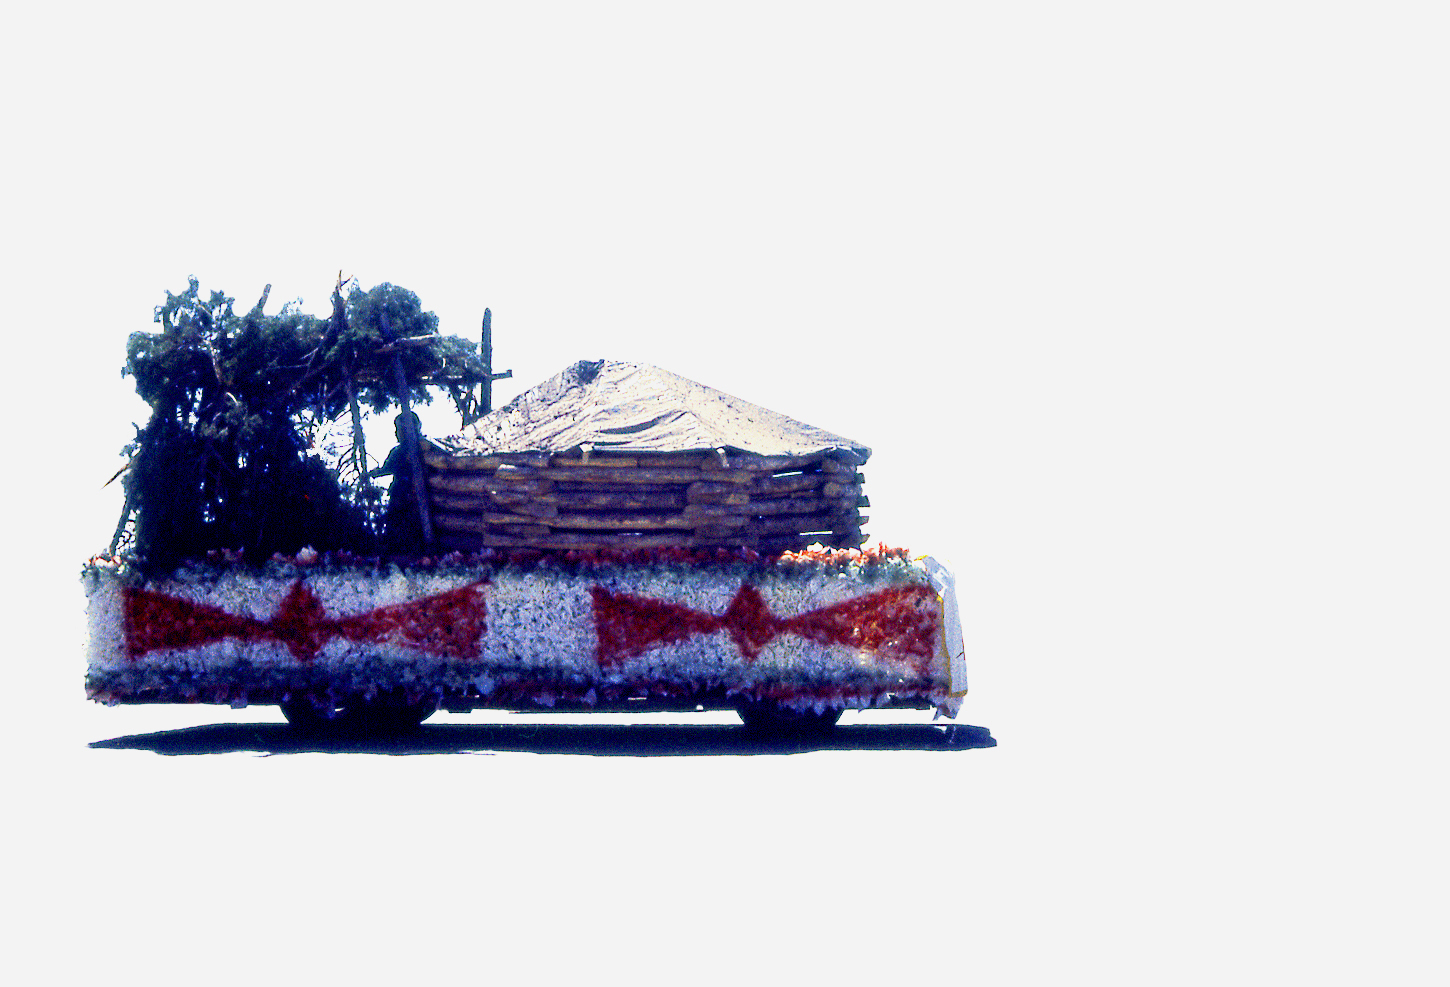  Wendy Red Star,  Round Hall Float , 2014, slide of Crow Fair parade at Crow Agency in the 1970s, archival pigment print. 